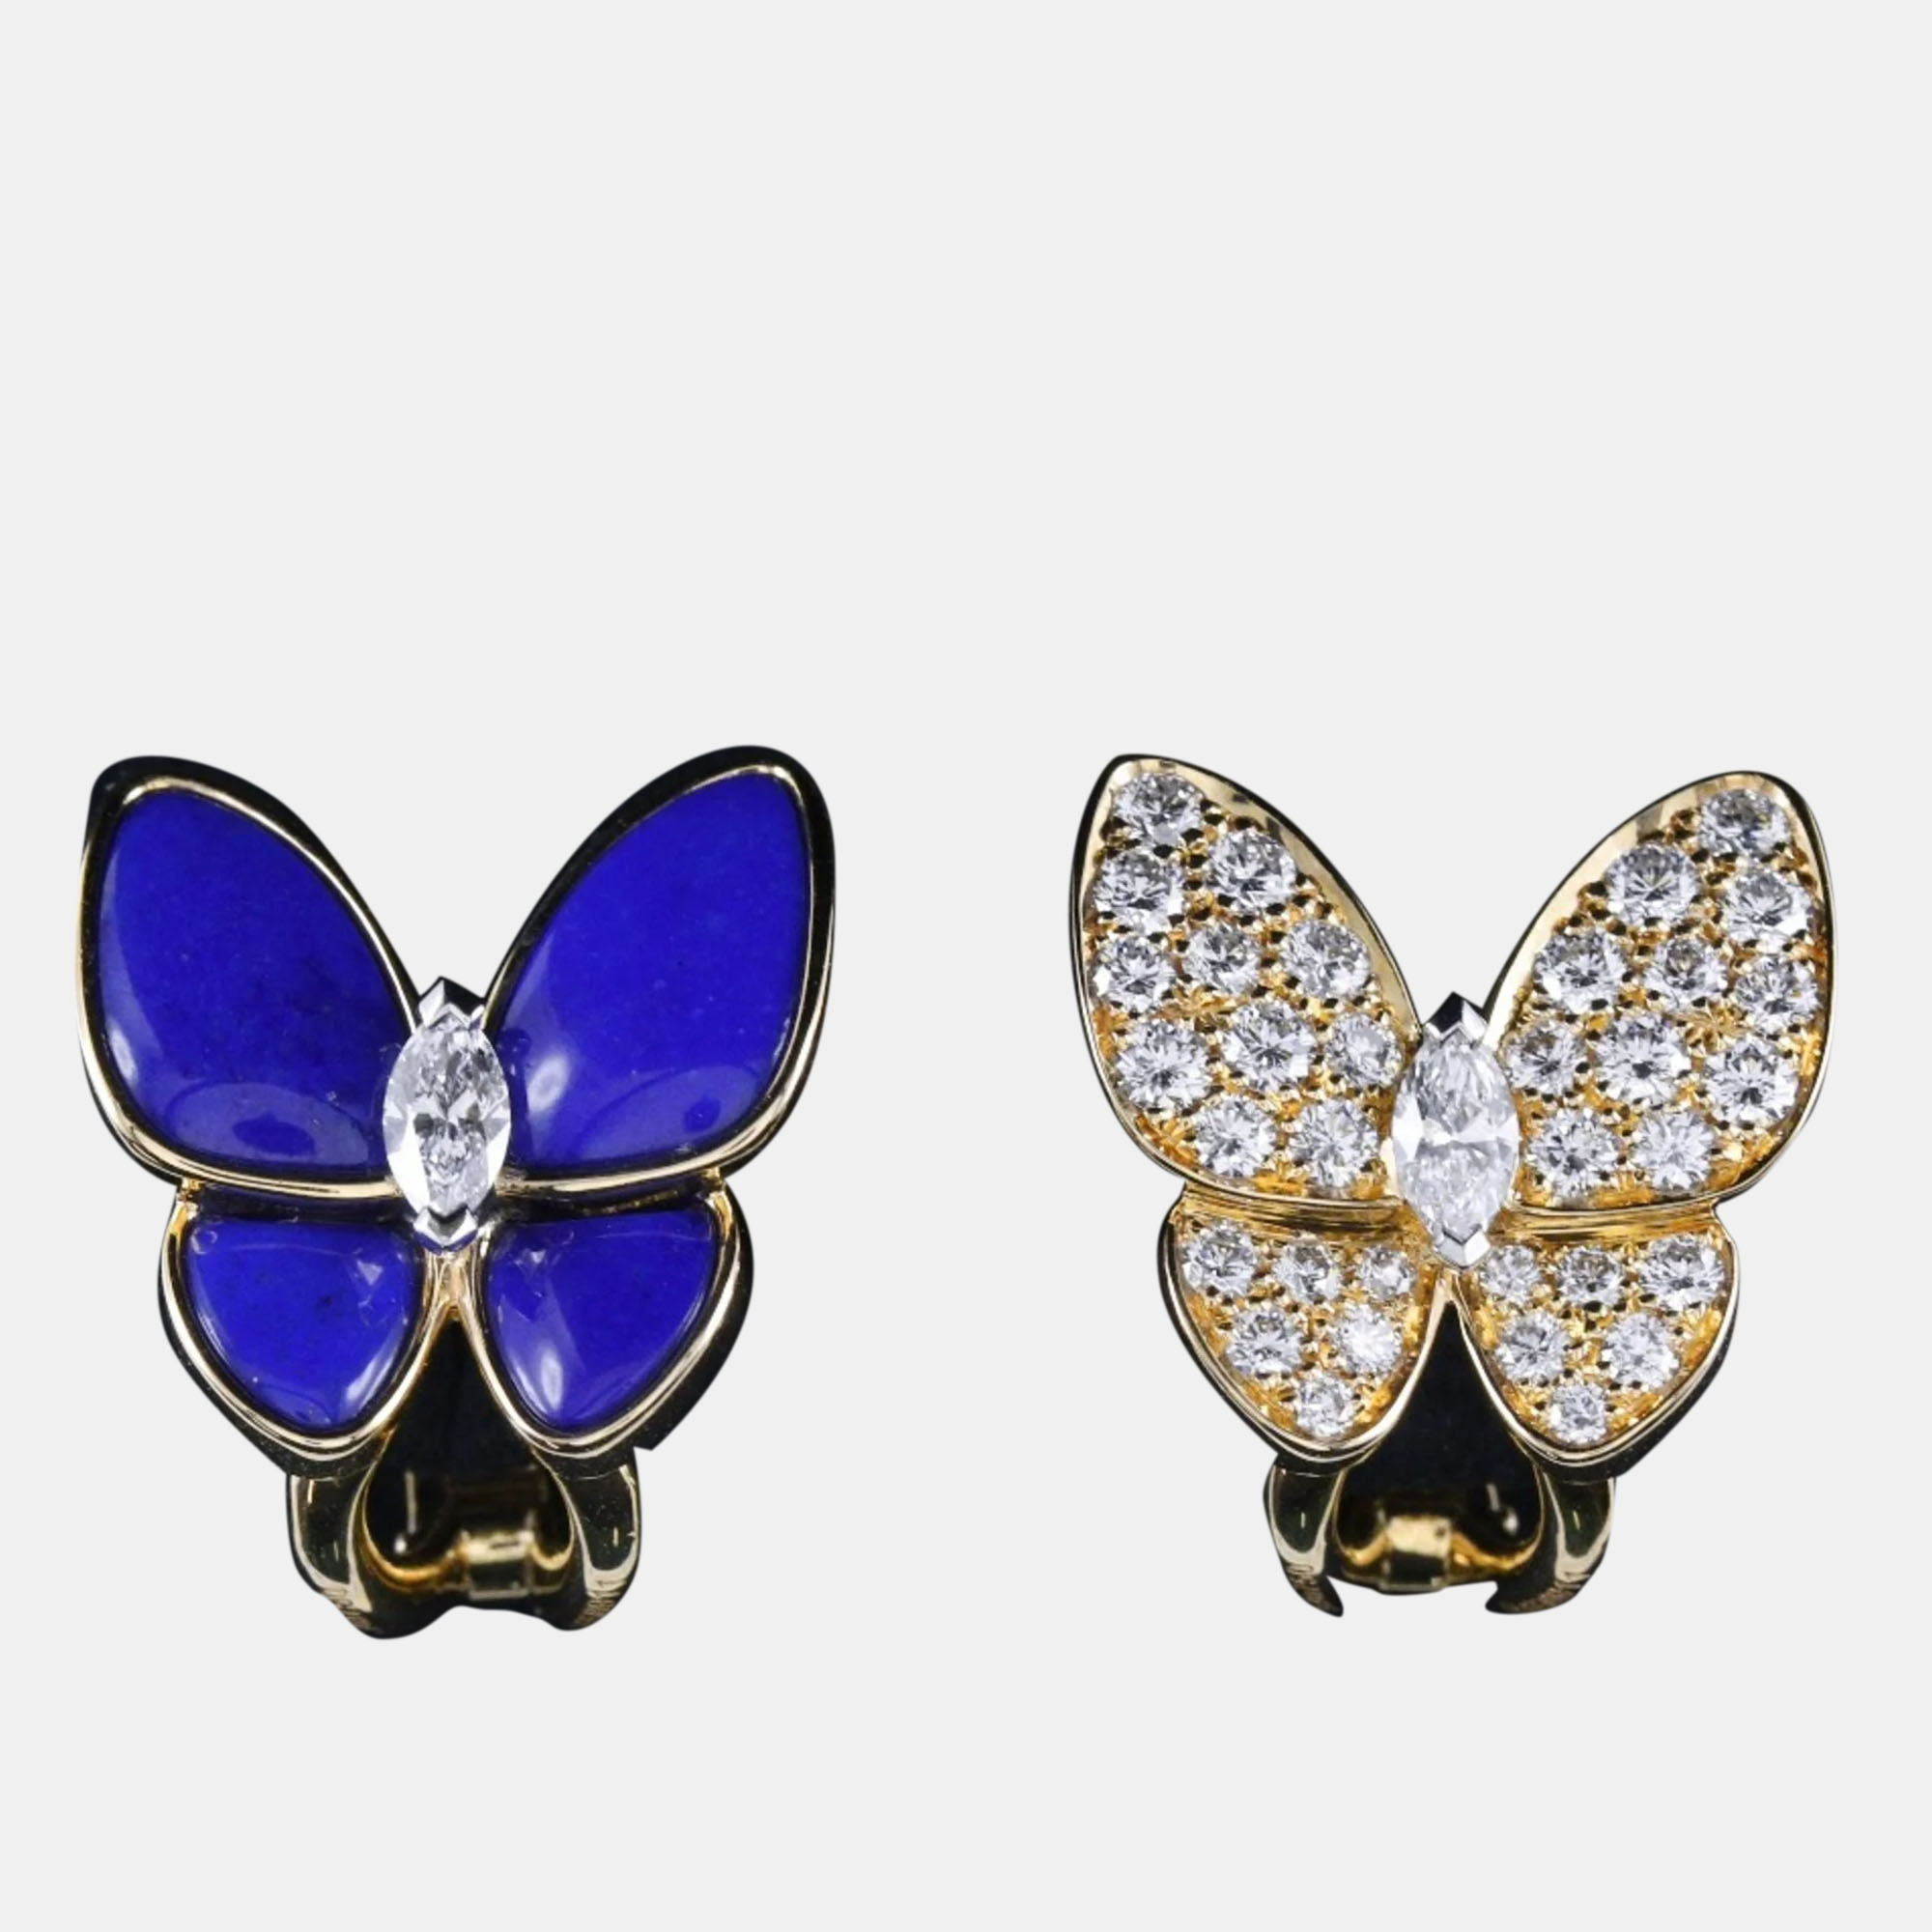 Van cleef & arpels 18k yellow gold, diamond and lapis lazuli two butterfly stud earrings